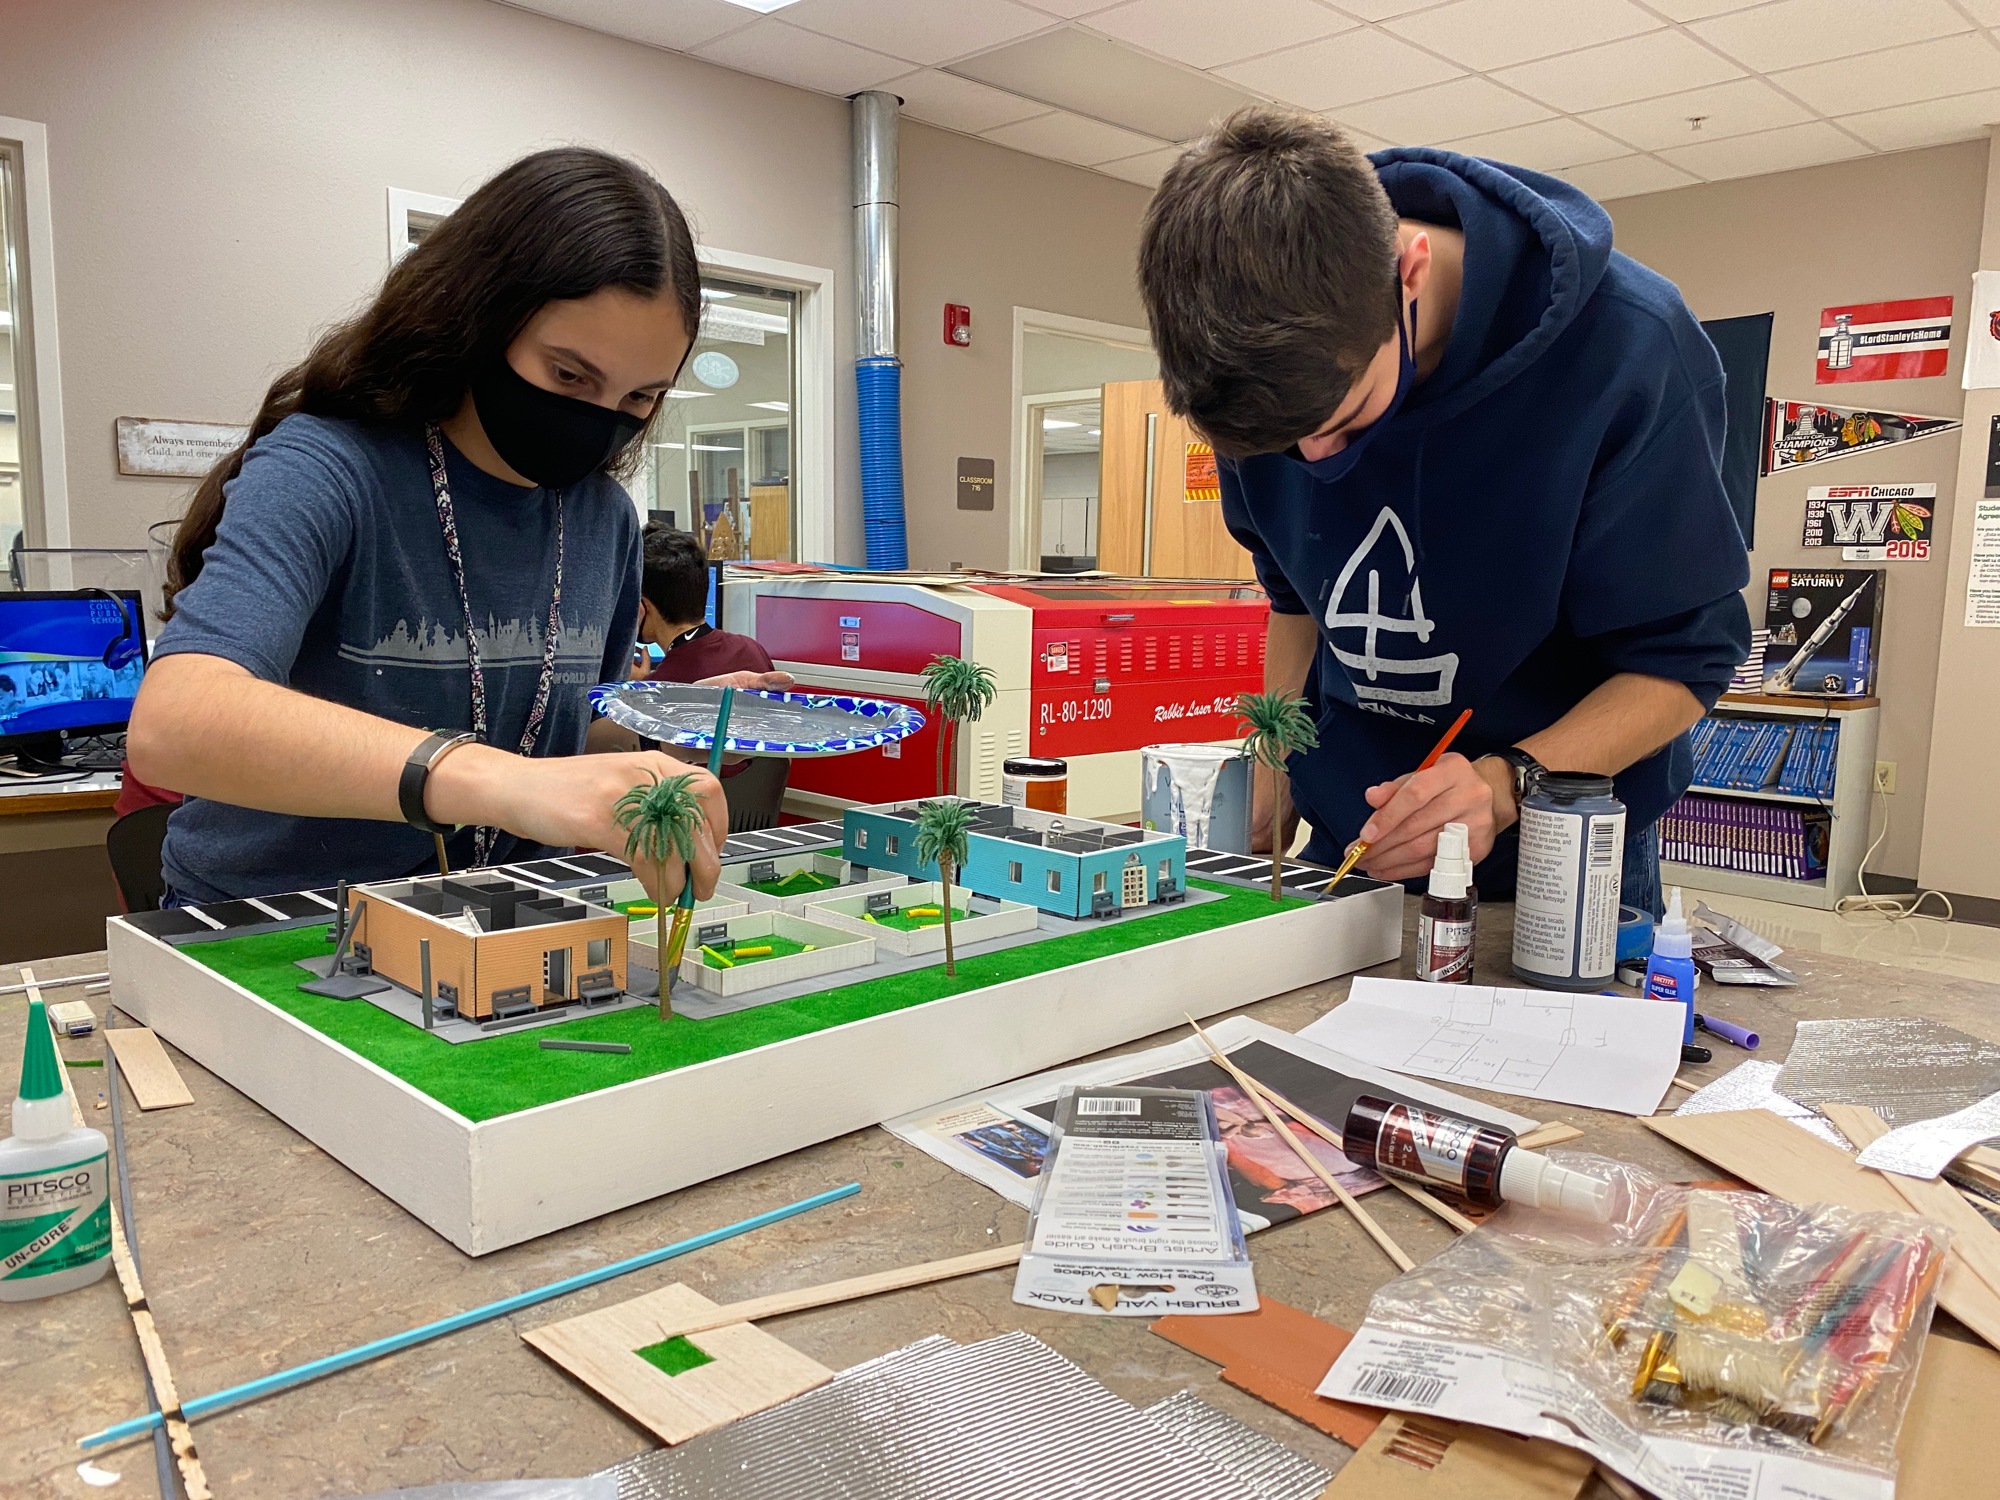 Isabella Pasquale and JT Wright, members of Braden River High School's TSA team, work to complete an architectural model. Courtesy photo.